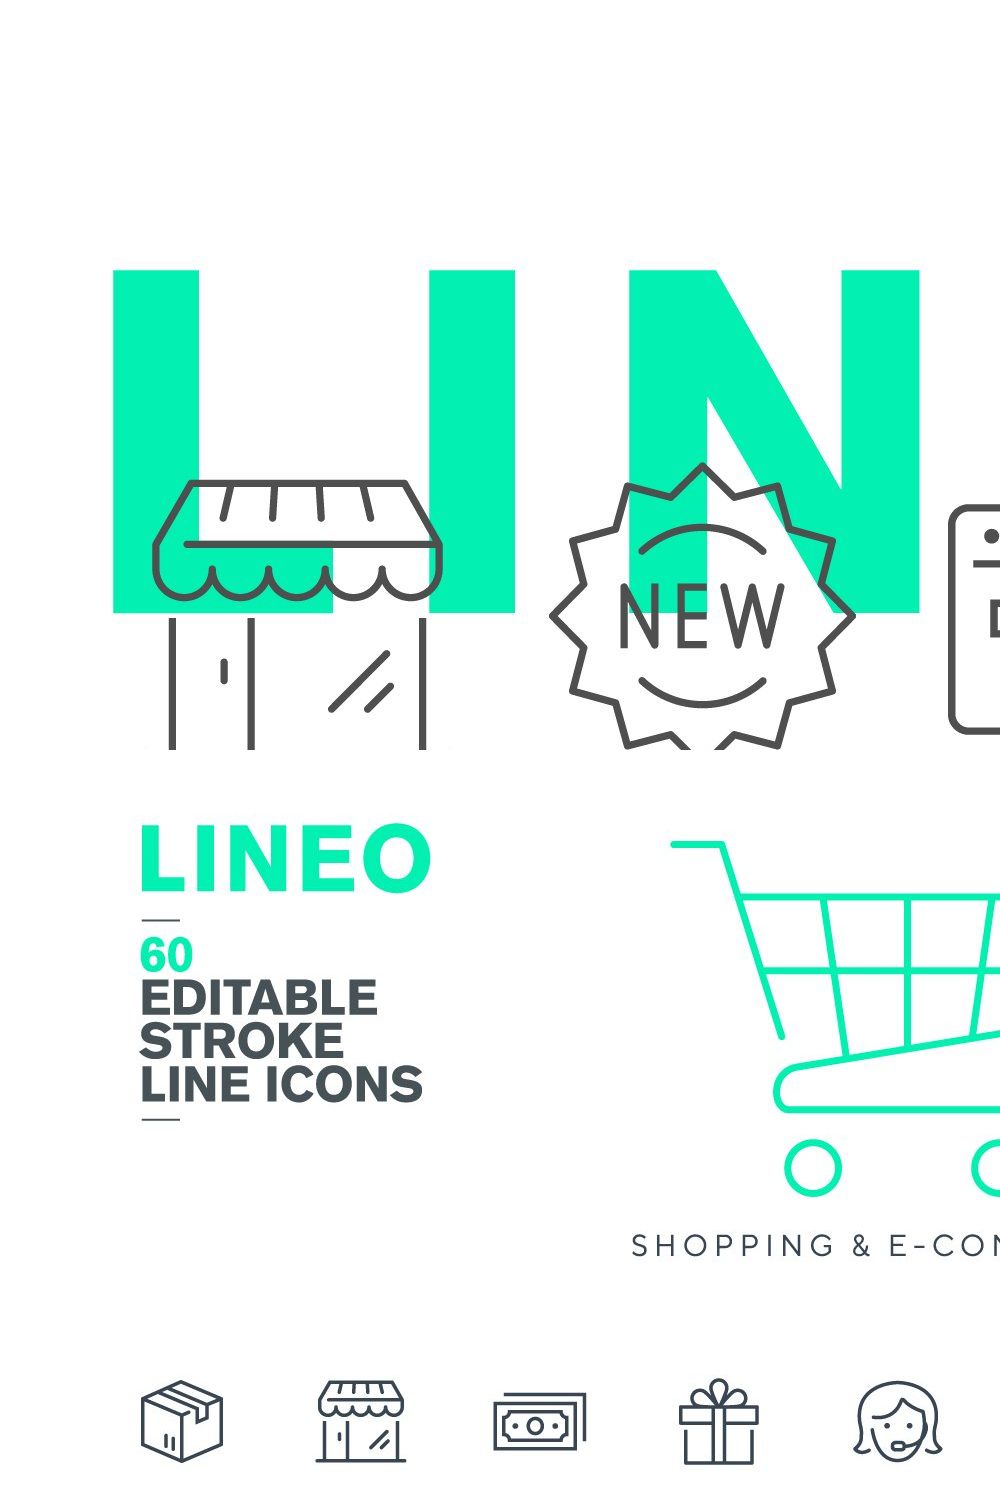 LINEO - 60 SHOPPING ICONS pinterest preview image.